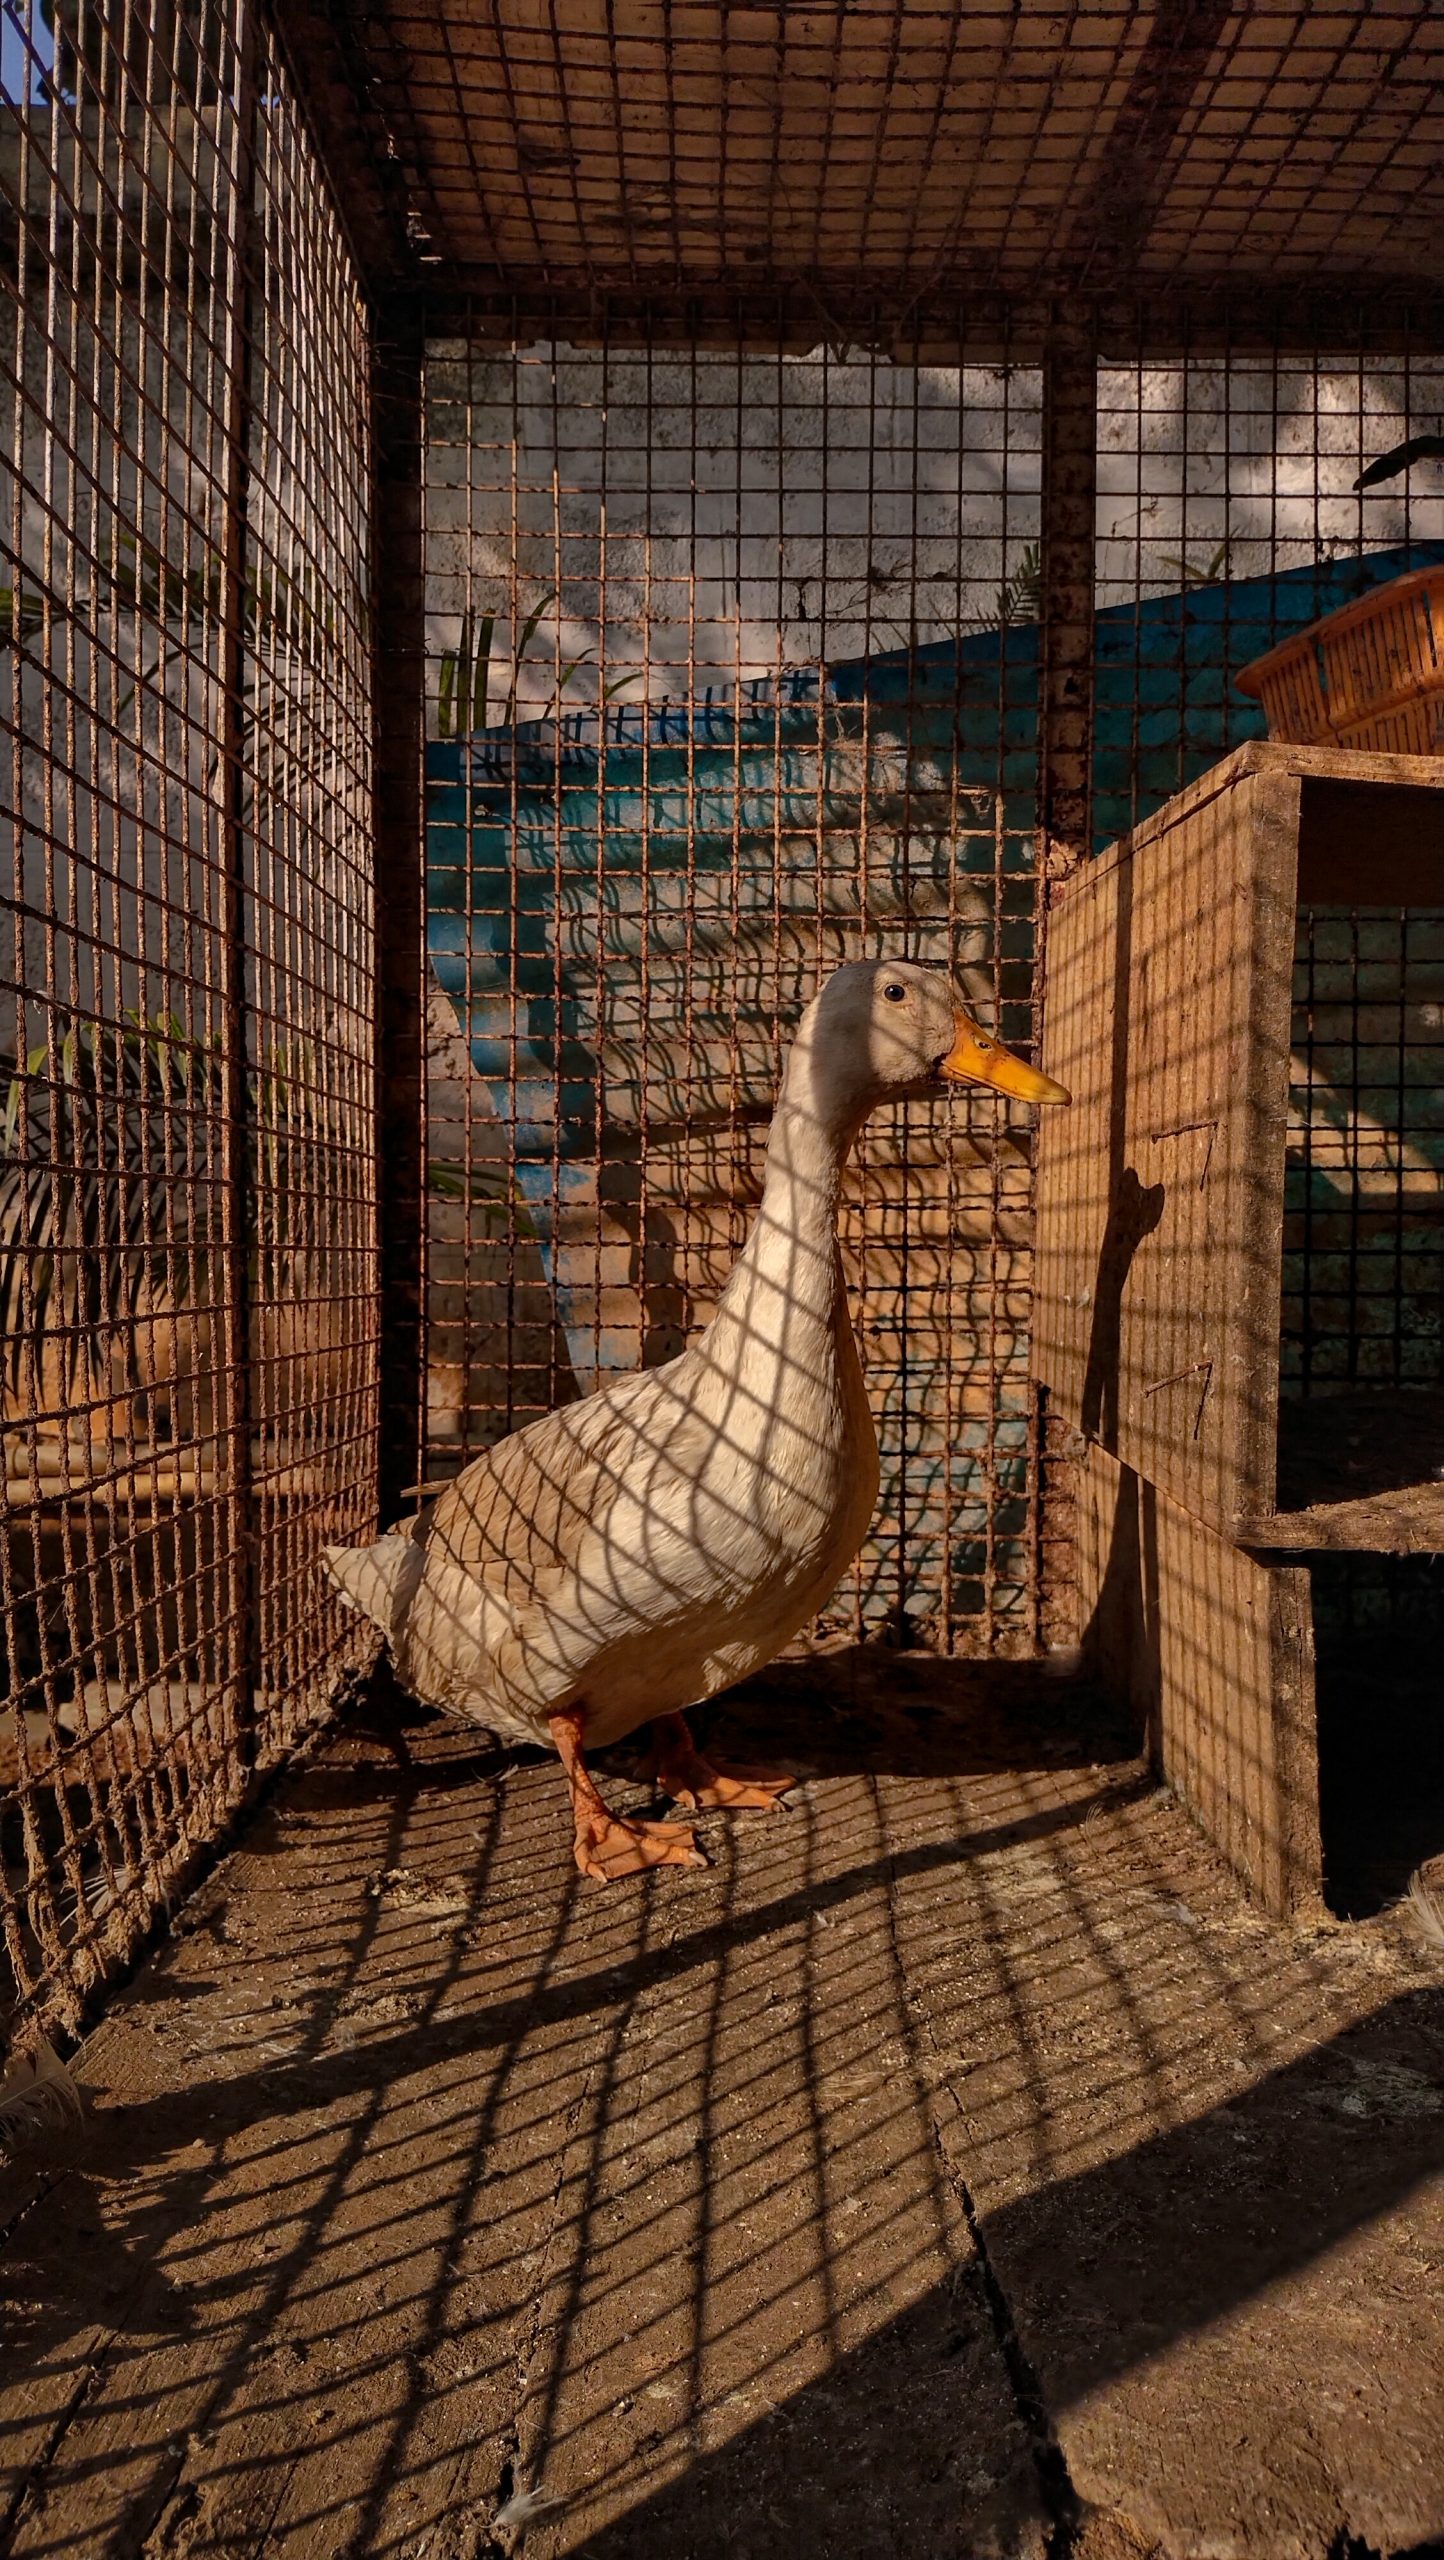 Duck in the cage